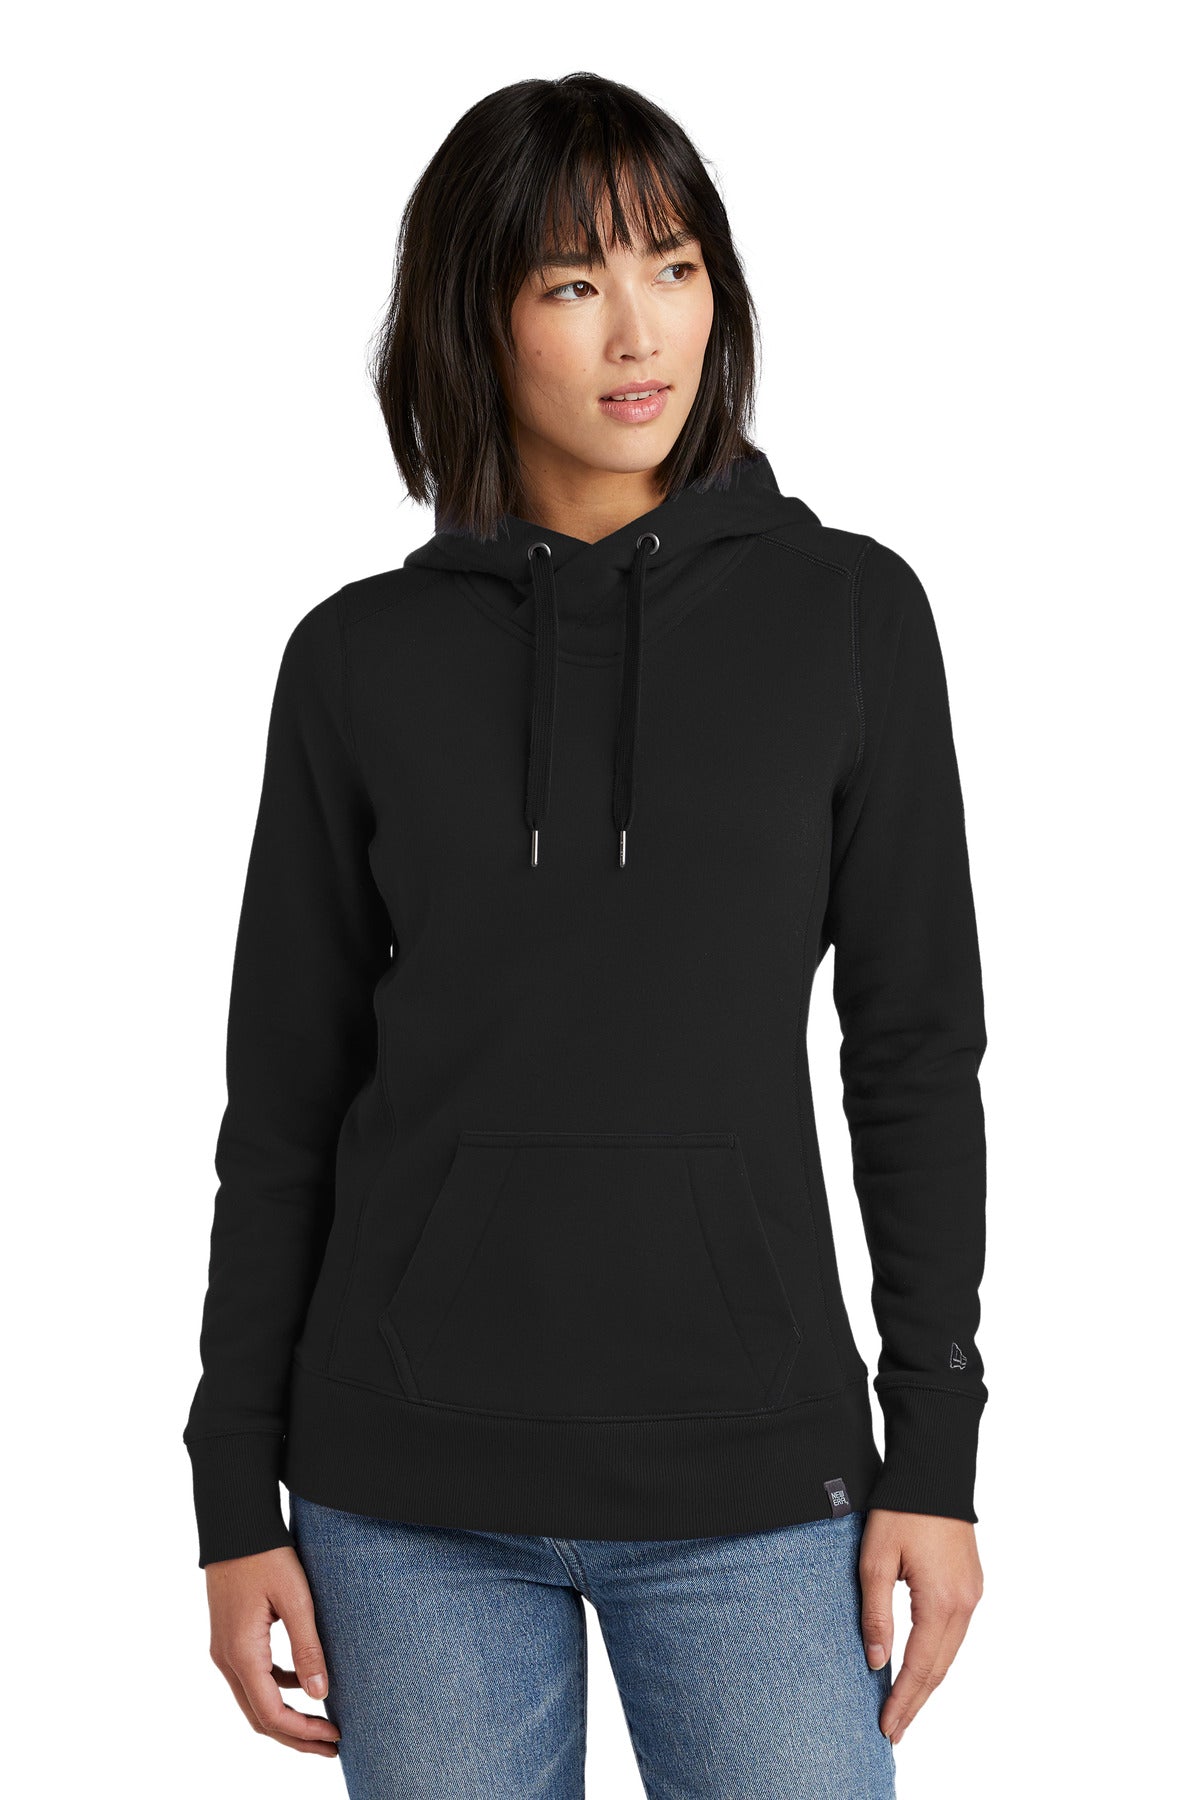 Custom Embroidered - New Era ® Ladies French Terry Pullover Hoodie. LNEA500